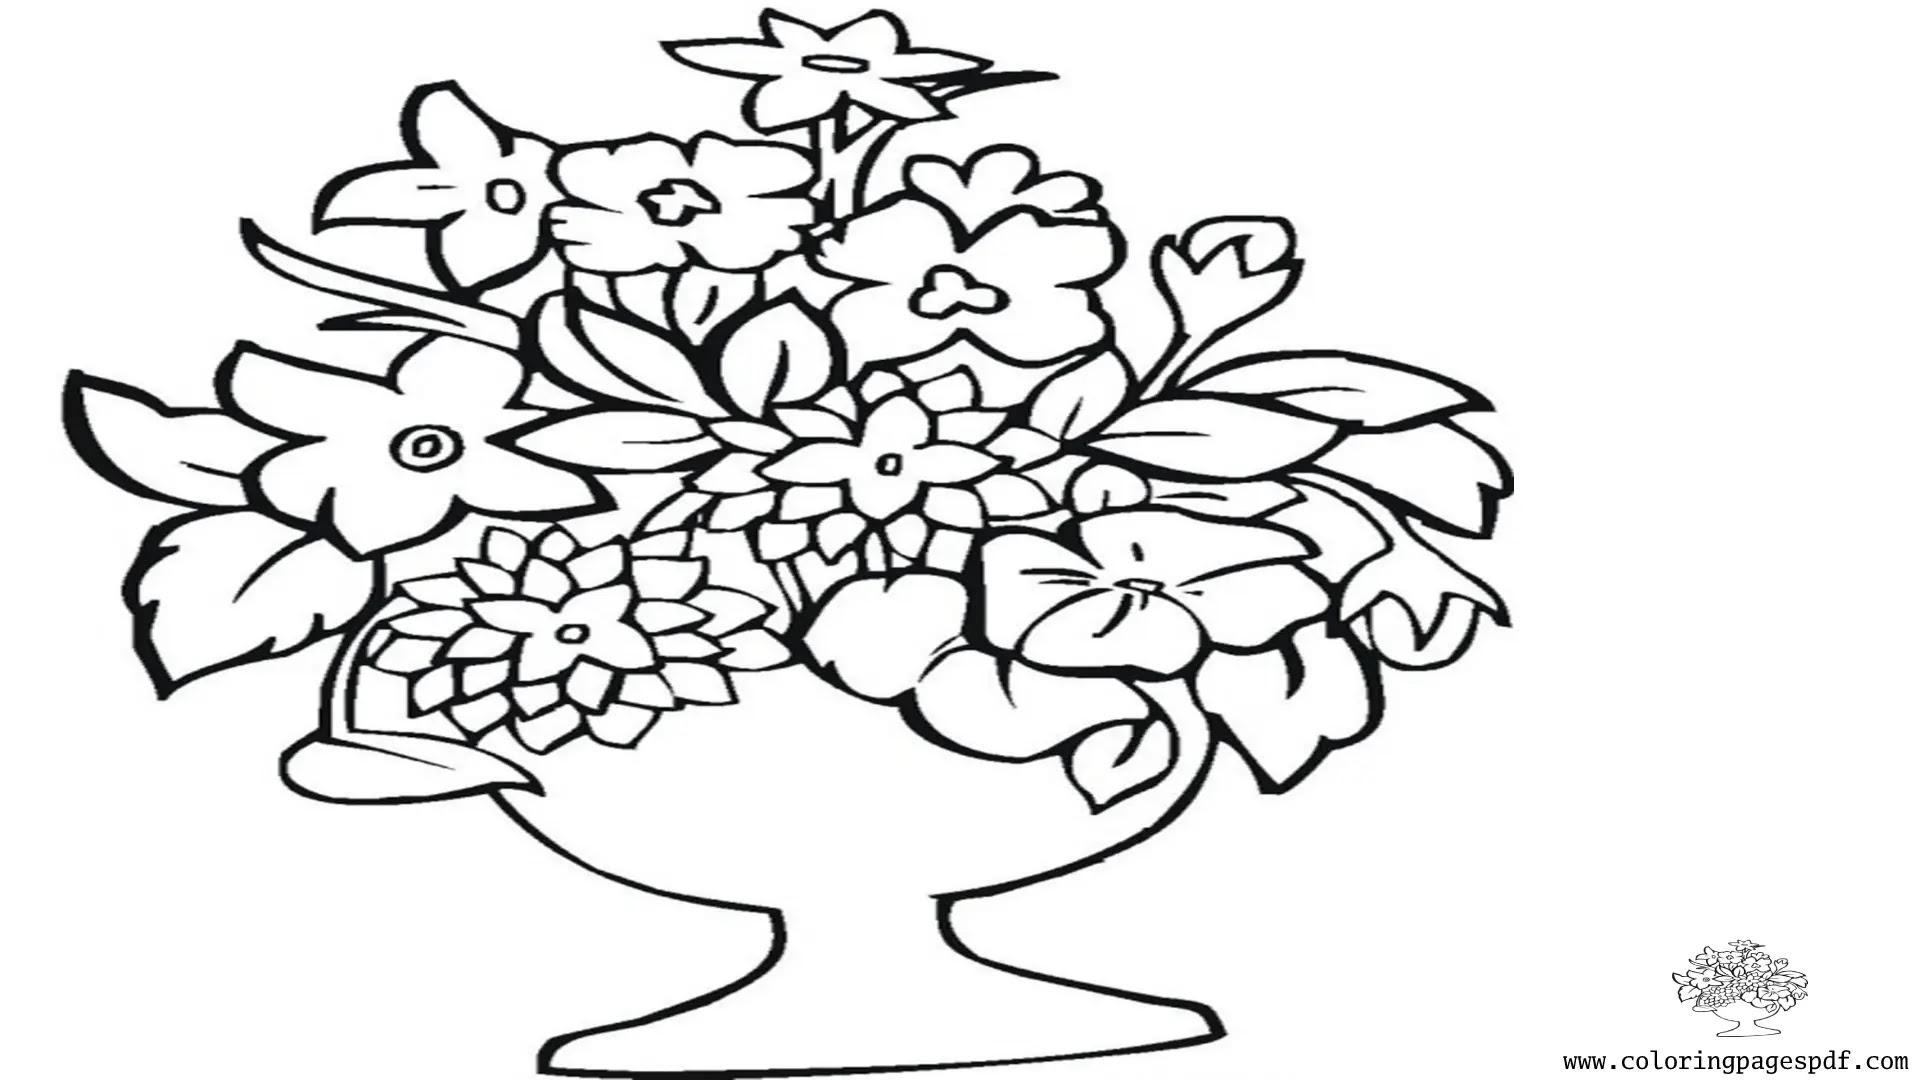 Coloring Page Of Flowers In A Cup